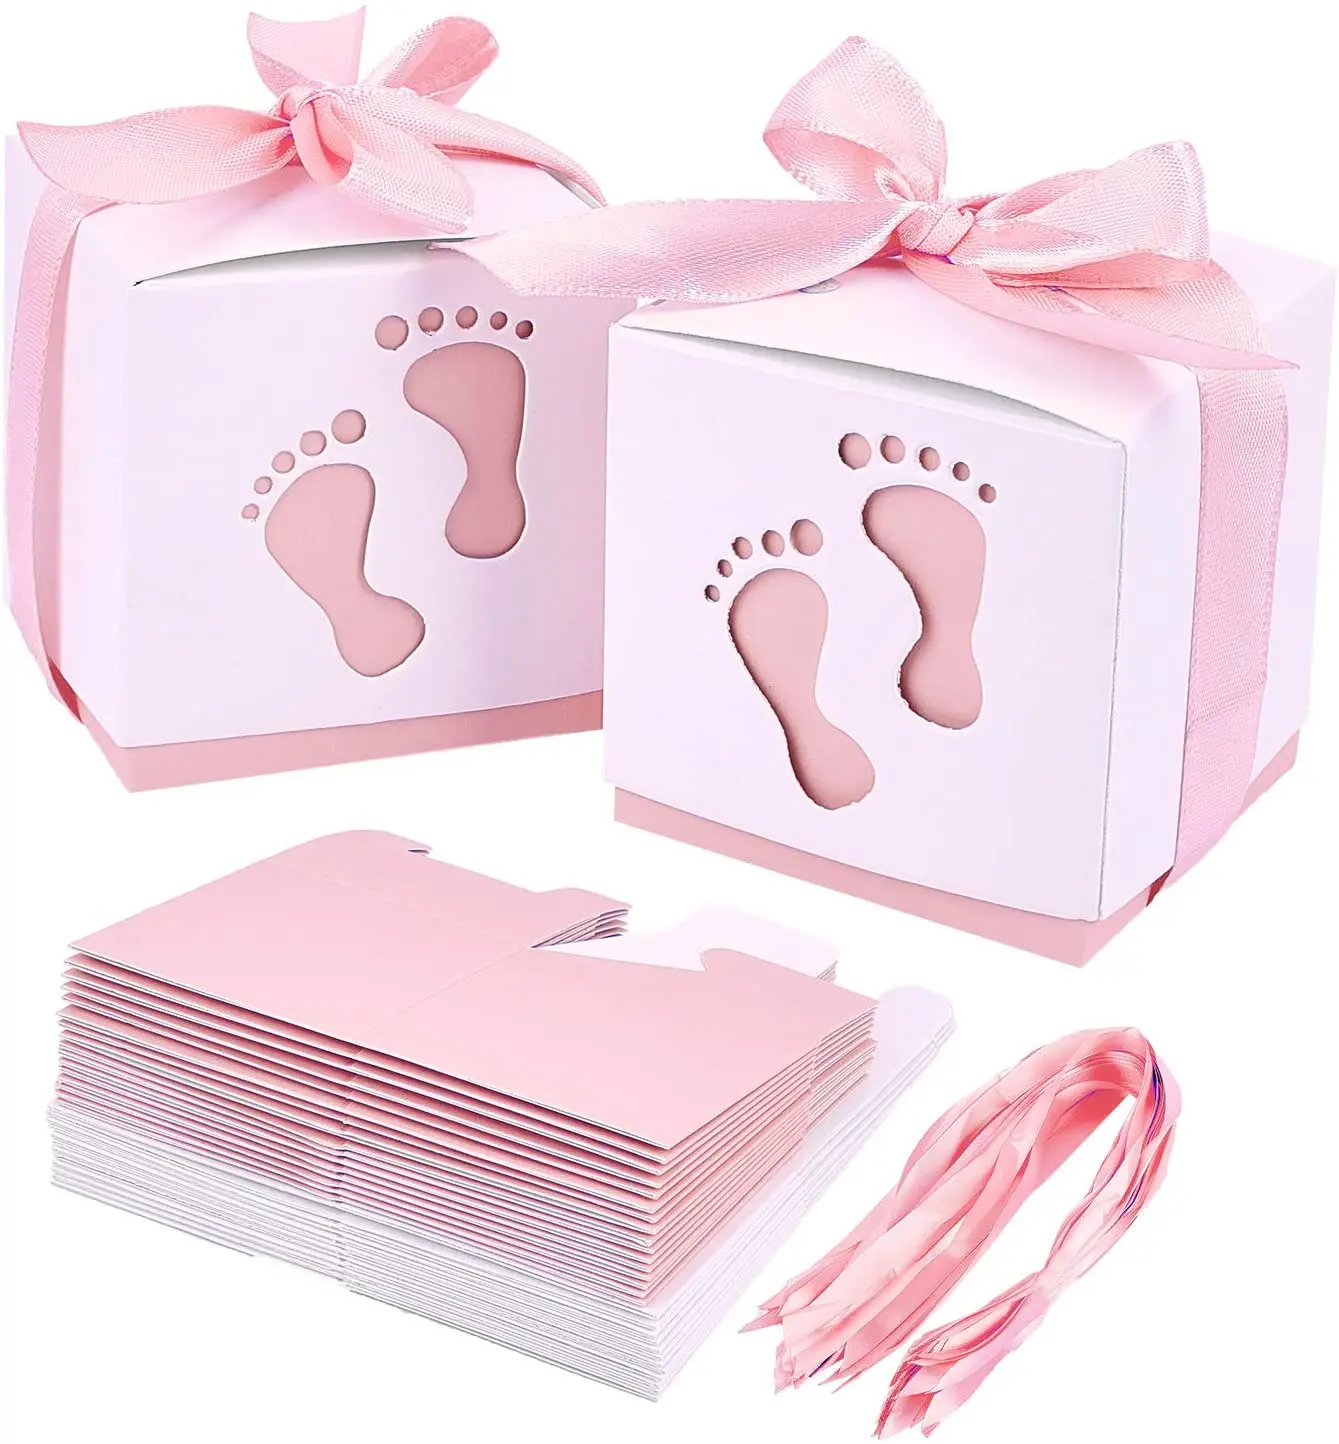 

50 PCS Of Newborn Baby Foot Pnt Candy Box, Baby Welcome Party Candy Box Folding Box Pink Paper Gift Box Birthday Party Gift